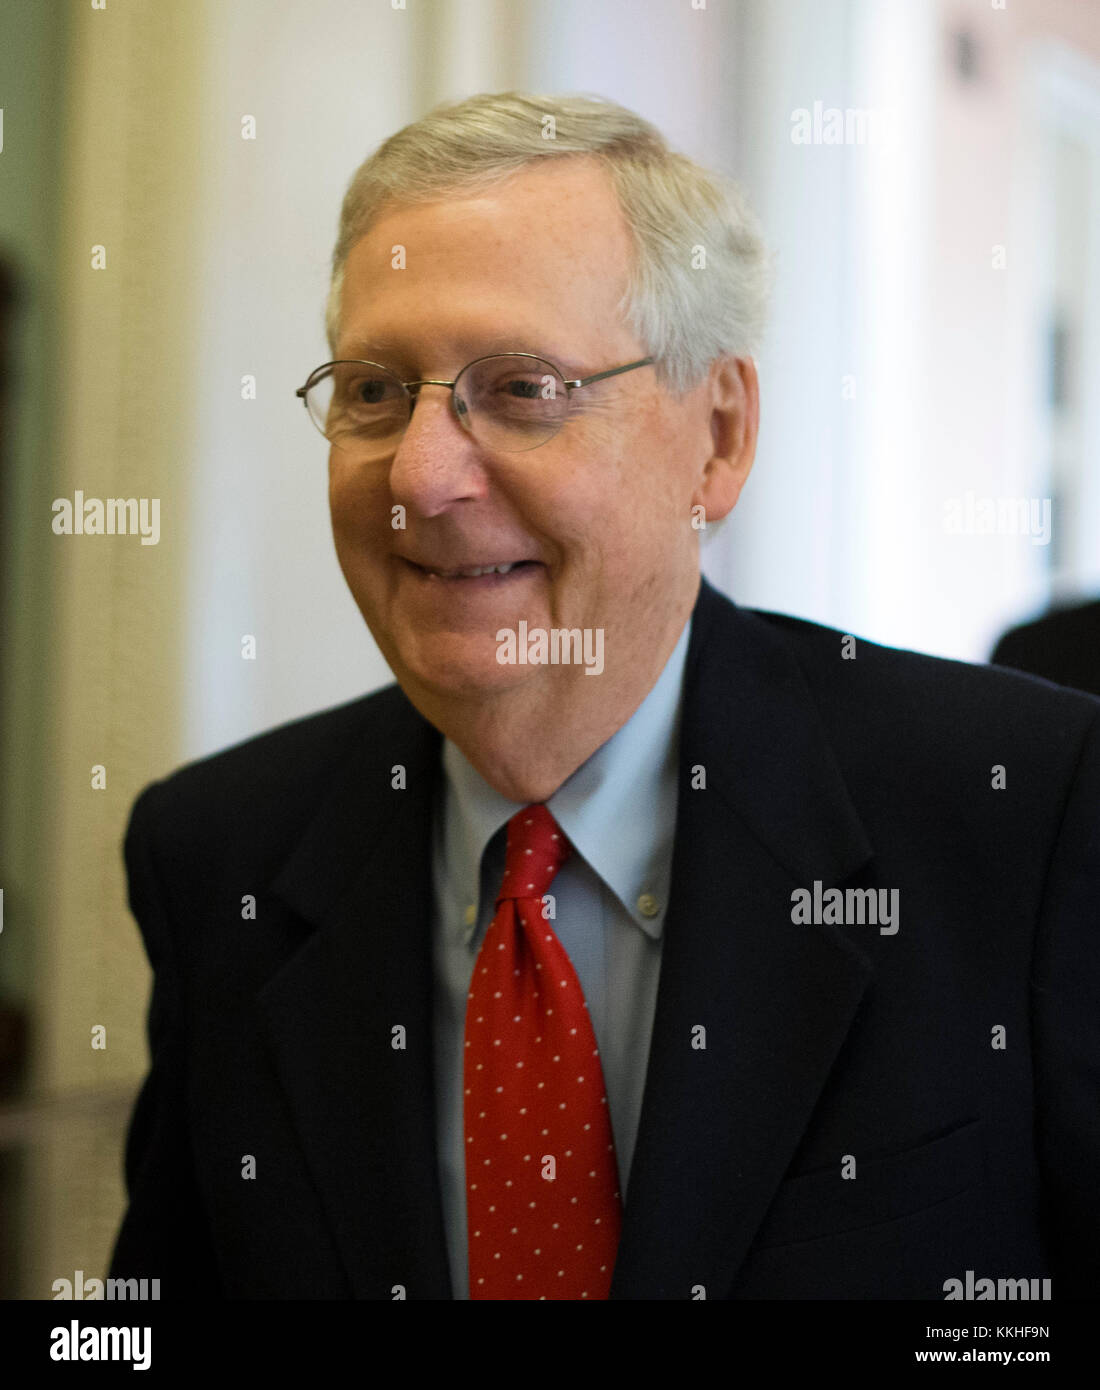 United States Senate Majority Leader Mitch McConnell (Republican of Kentucky) walks from his office to the Senate chamber for a procedural vote to move forward with voting on the Republican proposed tax reform bill at the United States Capitol in Washington, DC on Friday, December 1, 2017. Credit: Alex Edelman/CNP /MediaPunch Stock Photo